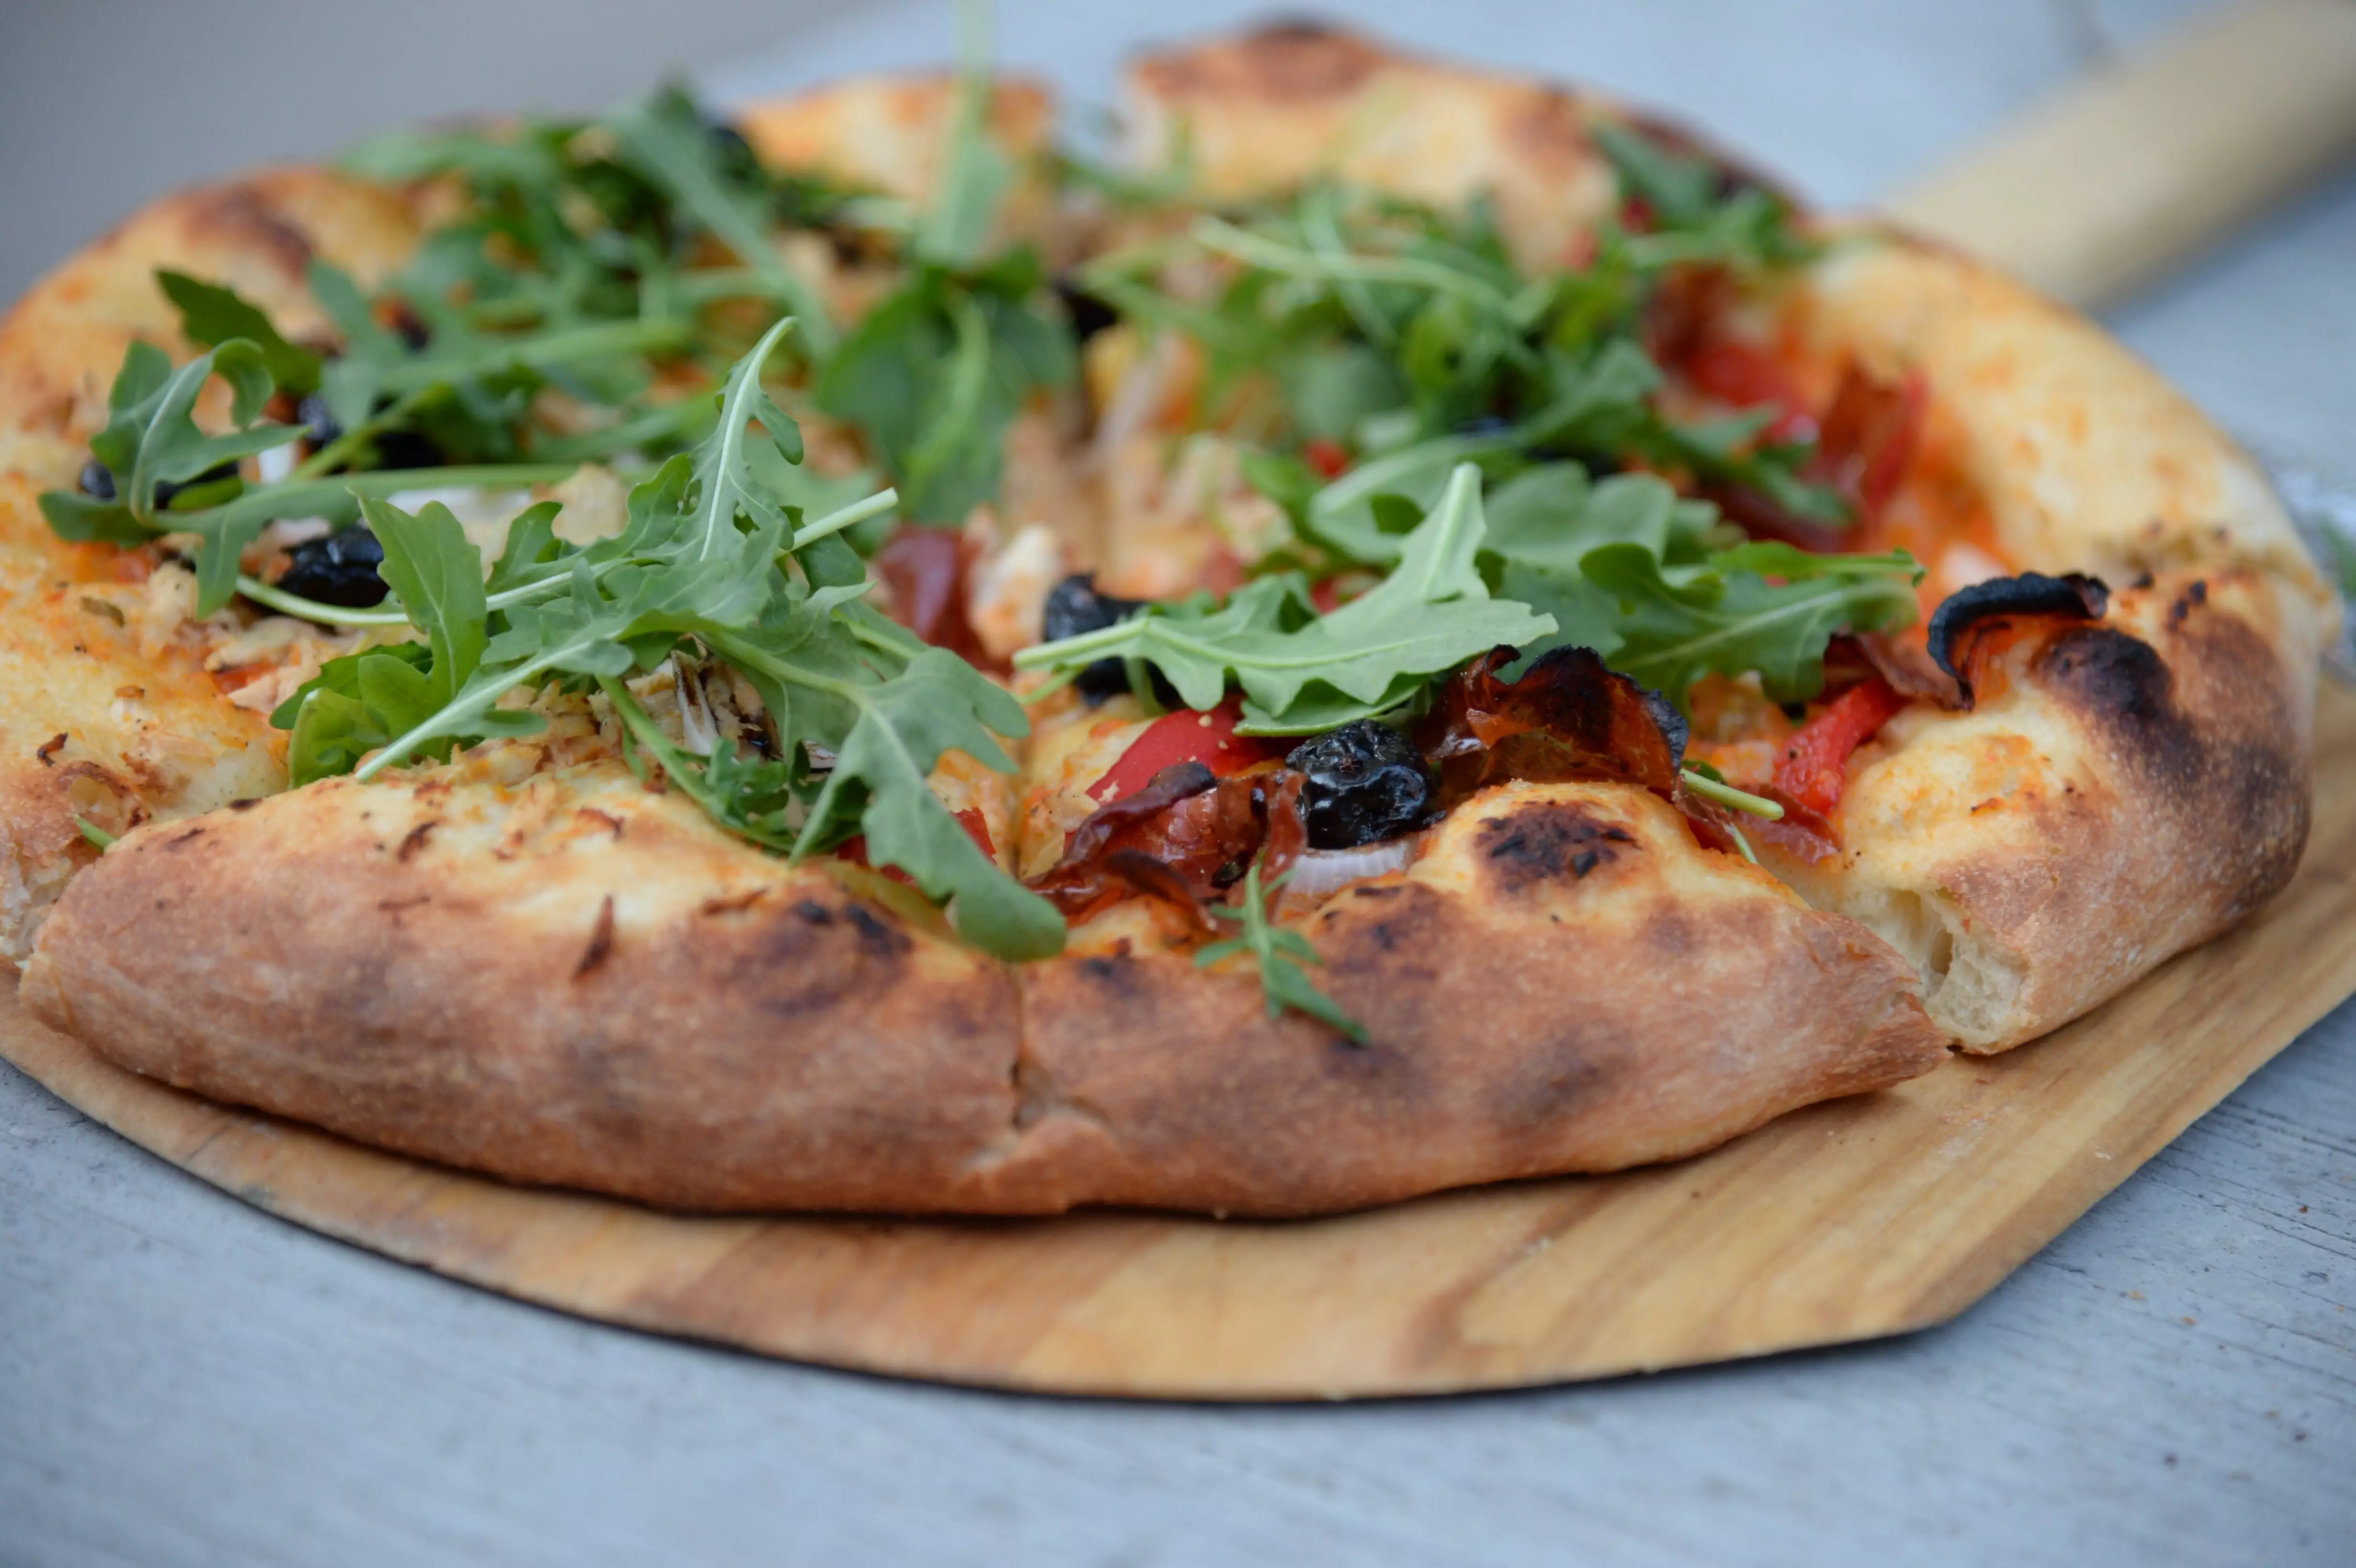 Wood Fired Pizza with Rocket, Olive and Tomatoes